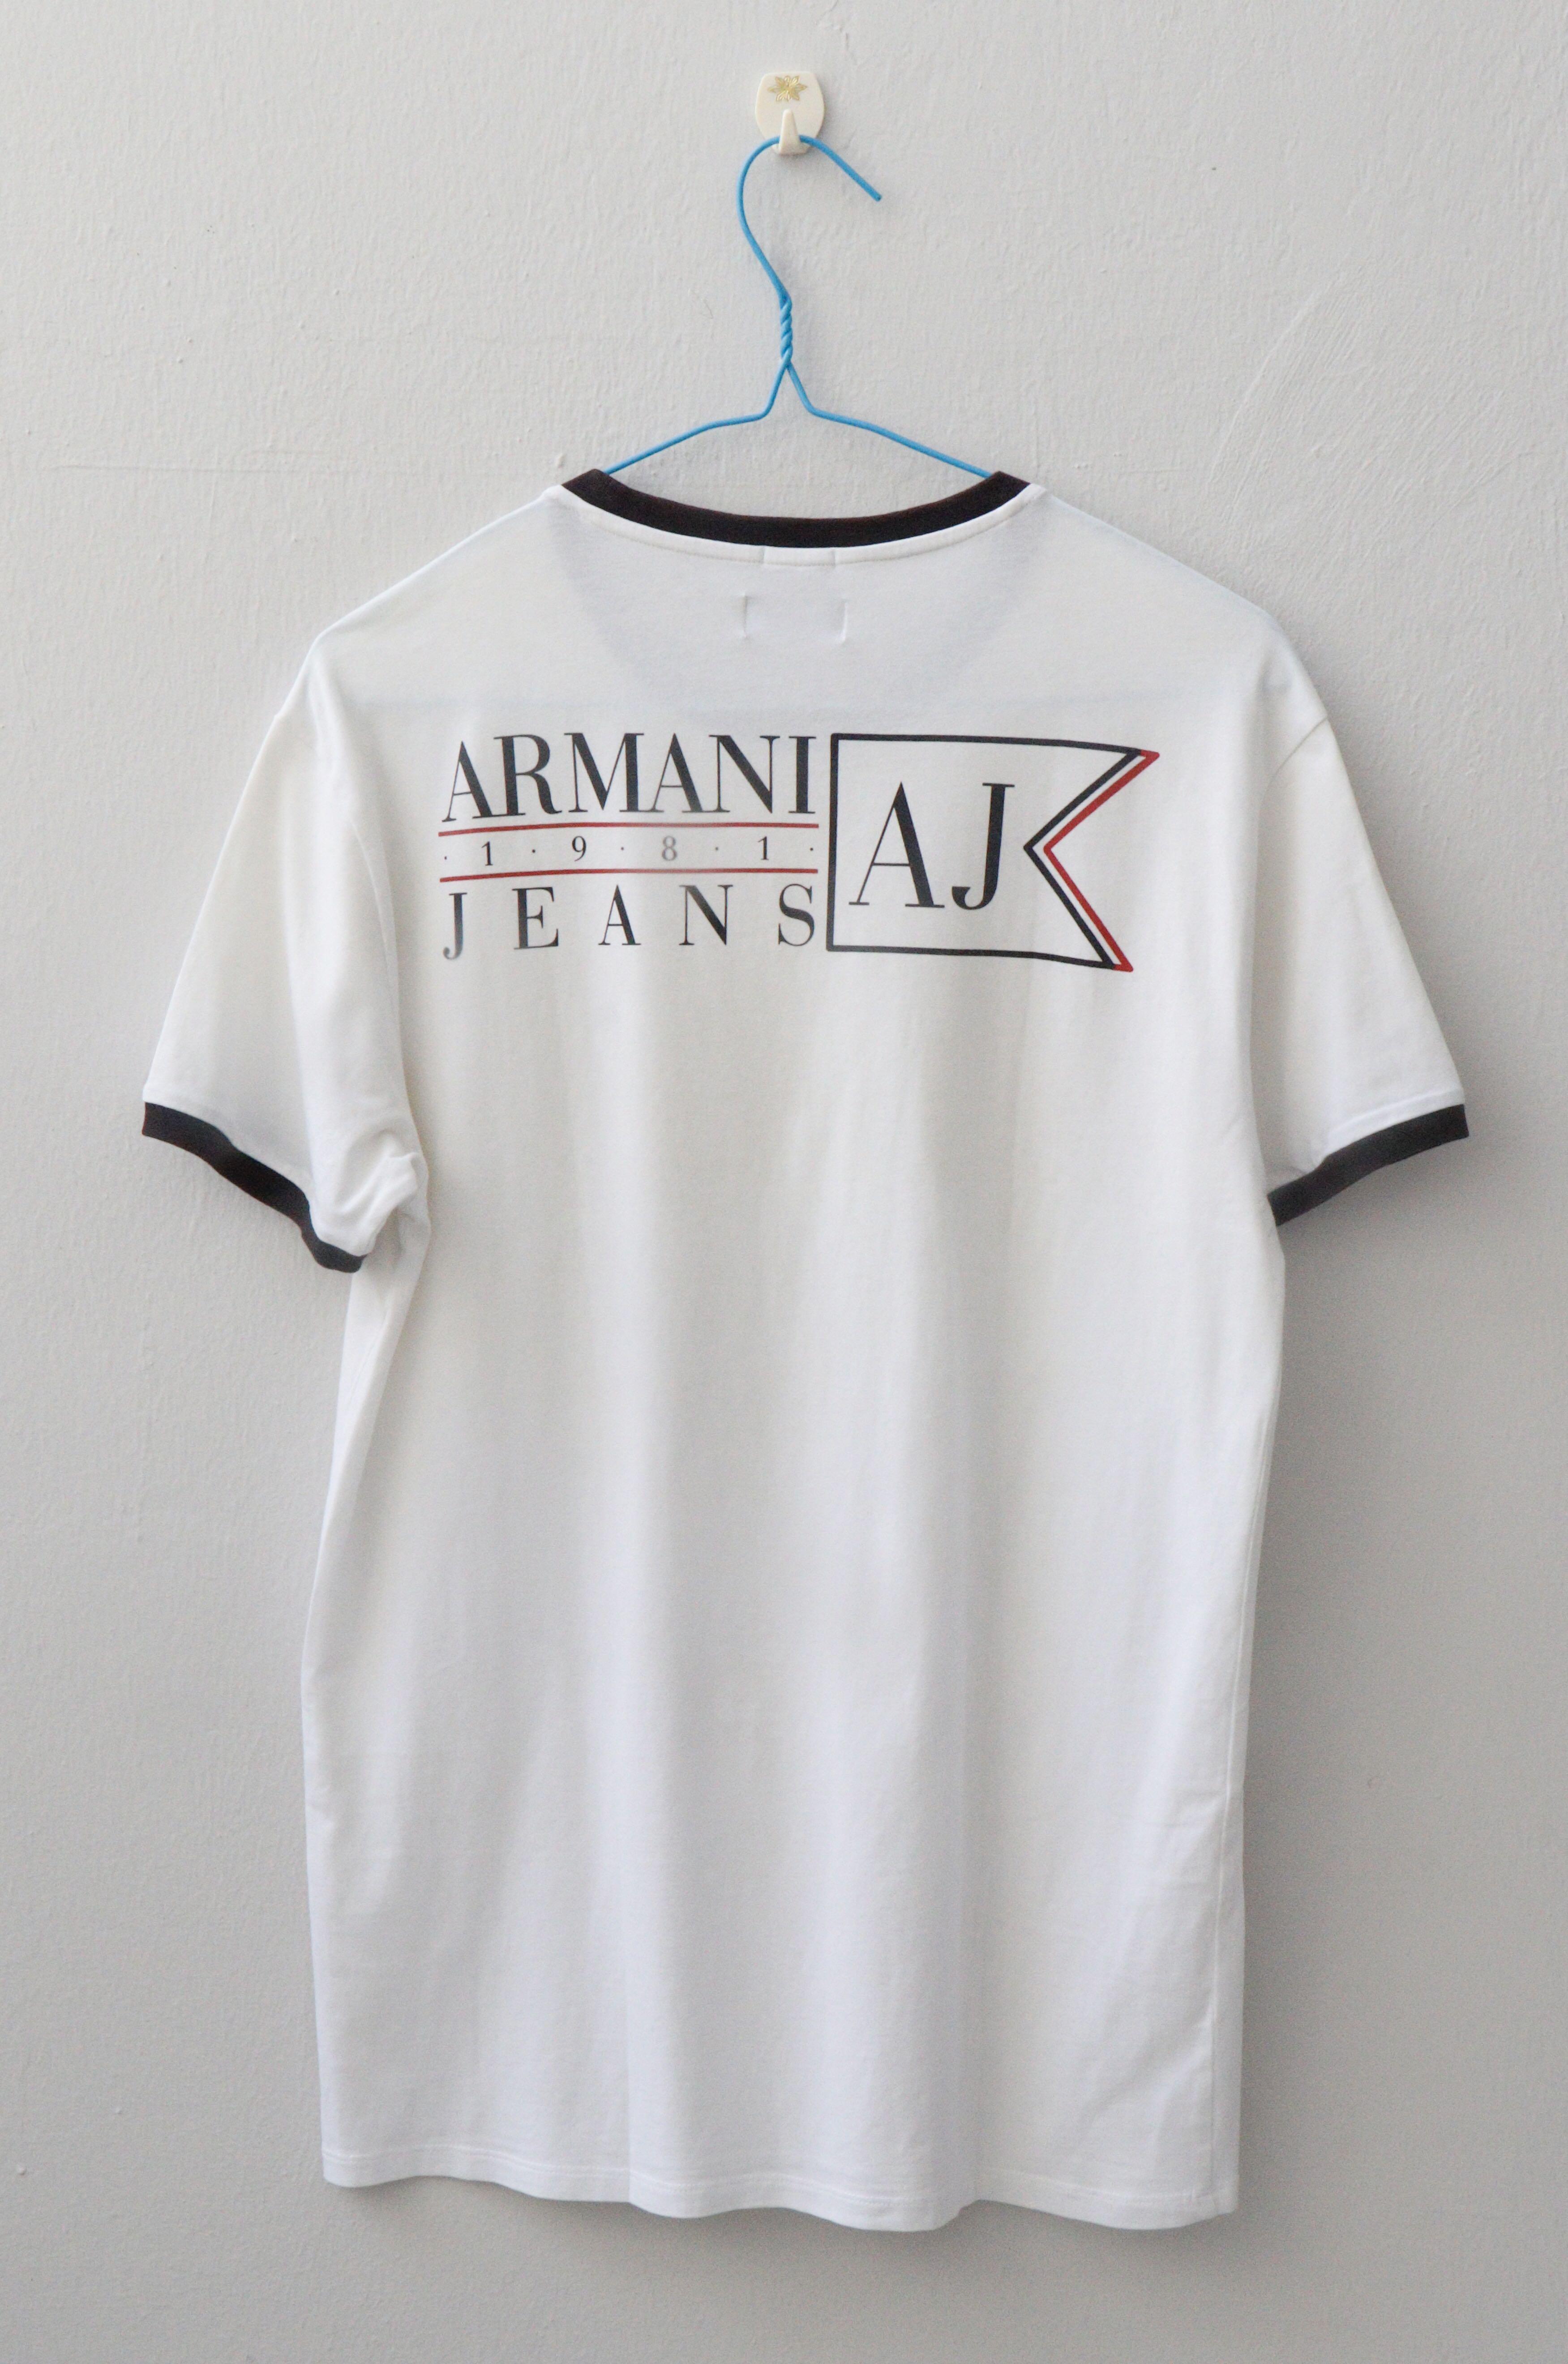 Udtale se anden ARMANI JEANS 1981 ROUND NECK T-SHIRT, Men's Fashion, Tops & Sets, Tshirts &  Polo Shirts on Carousell